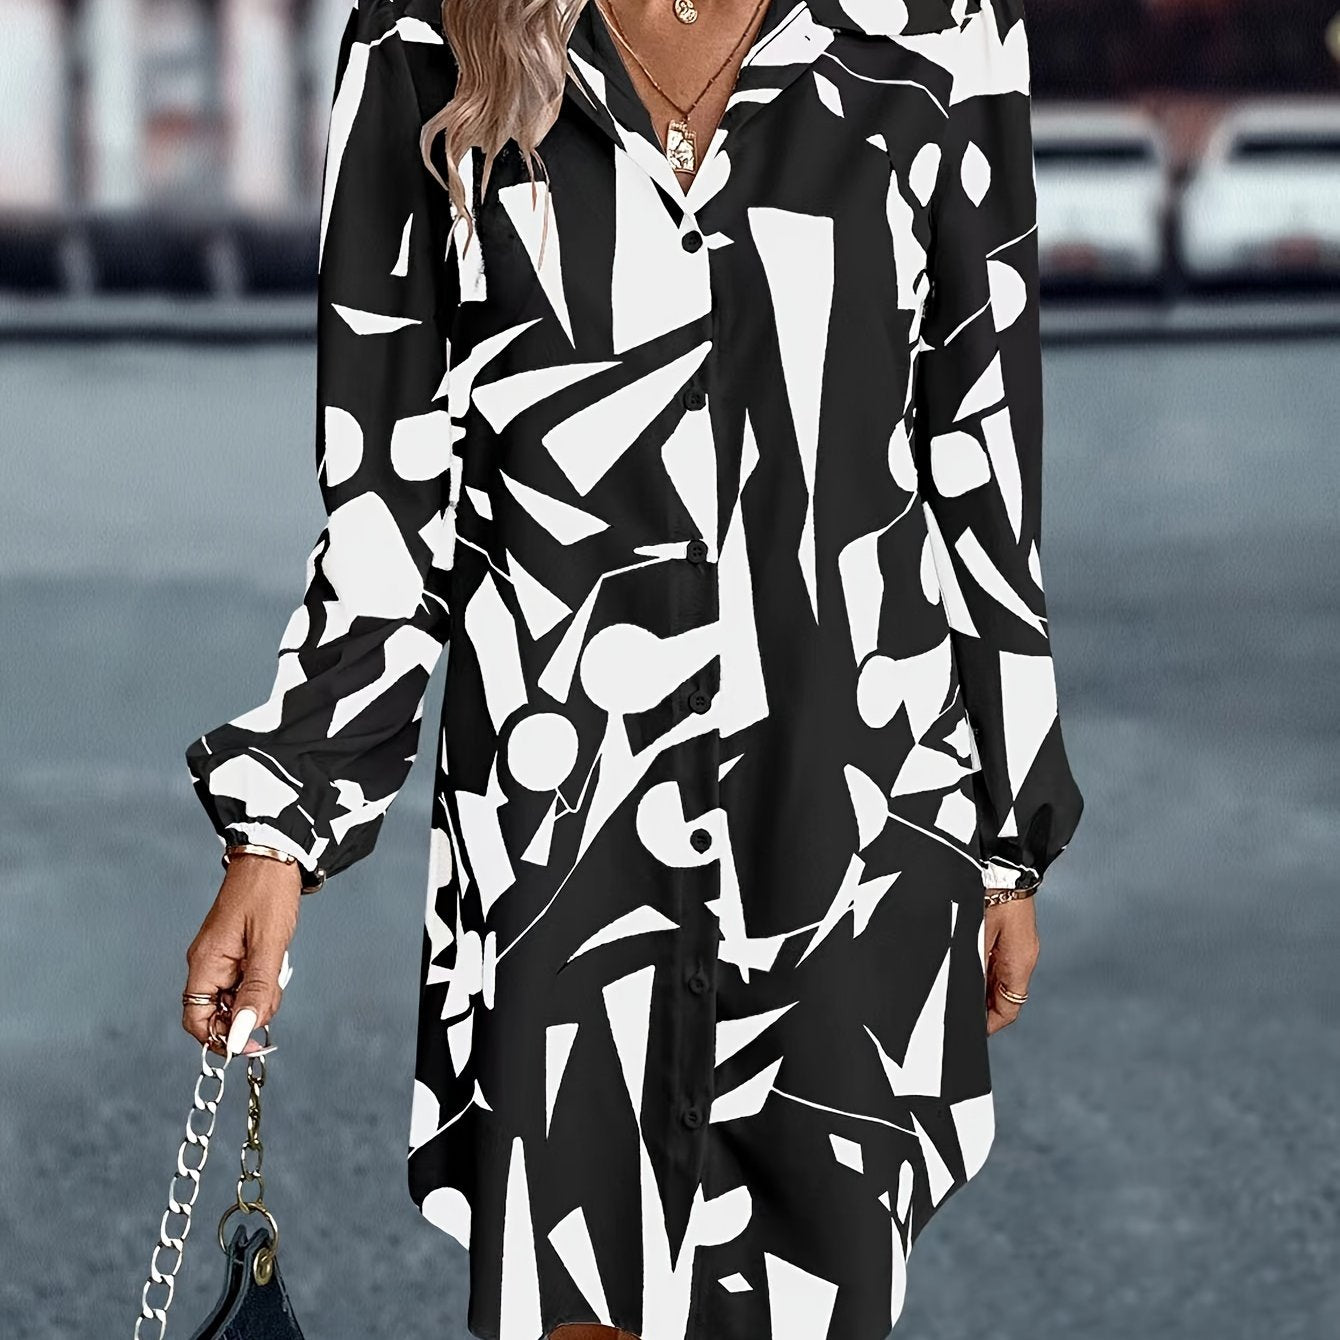 Graphic Print Button Front Dress, Casual Long Sleeve Lapel Dress, Women's Clothing